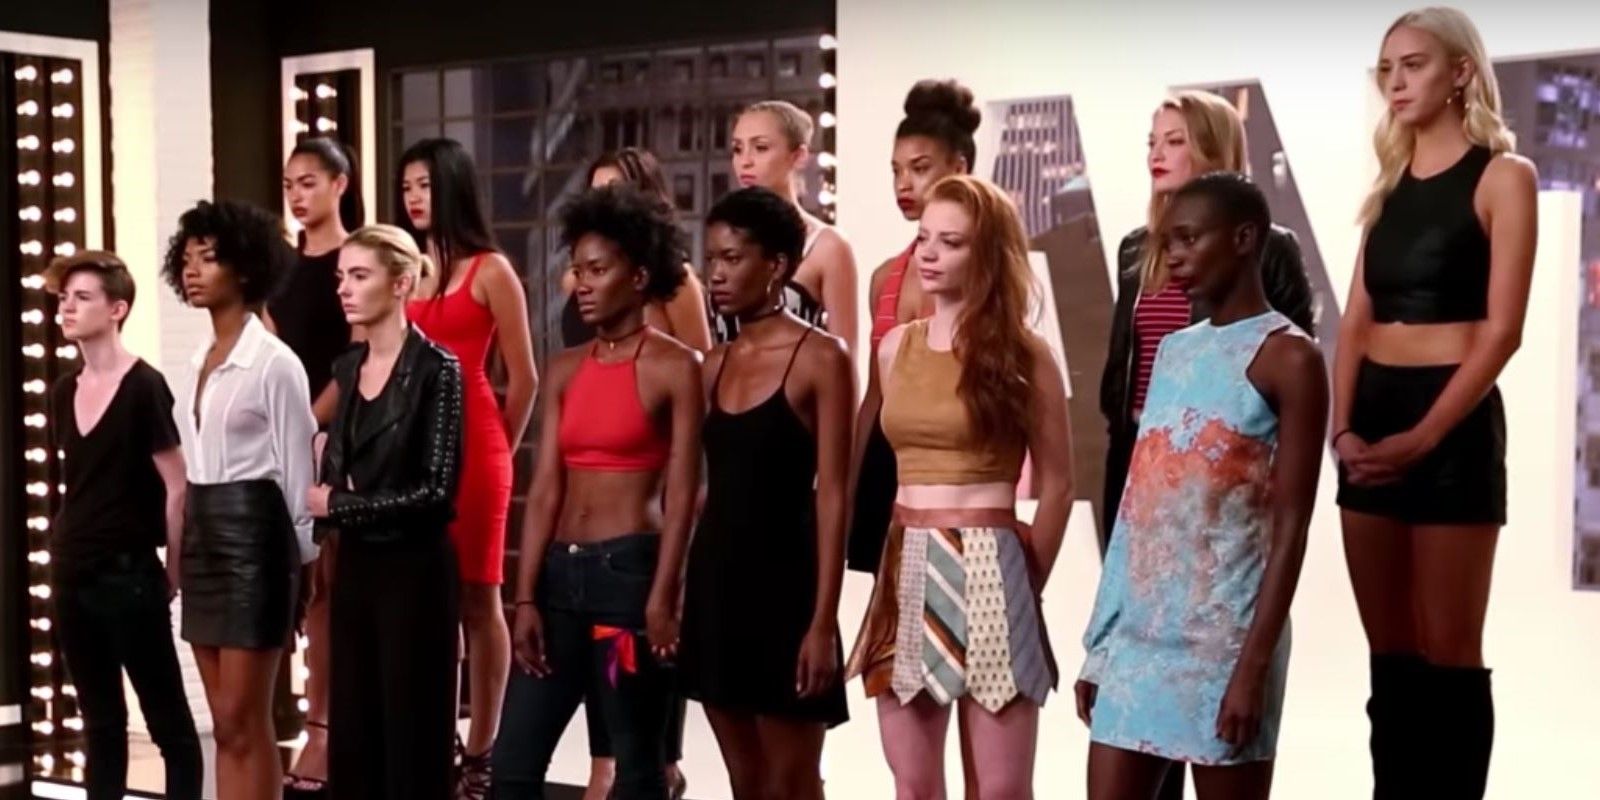 Americas Next Top Model & 9 Best Fashion Reality TV Shows Ranked By IMDb